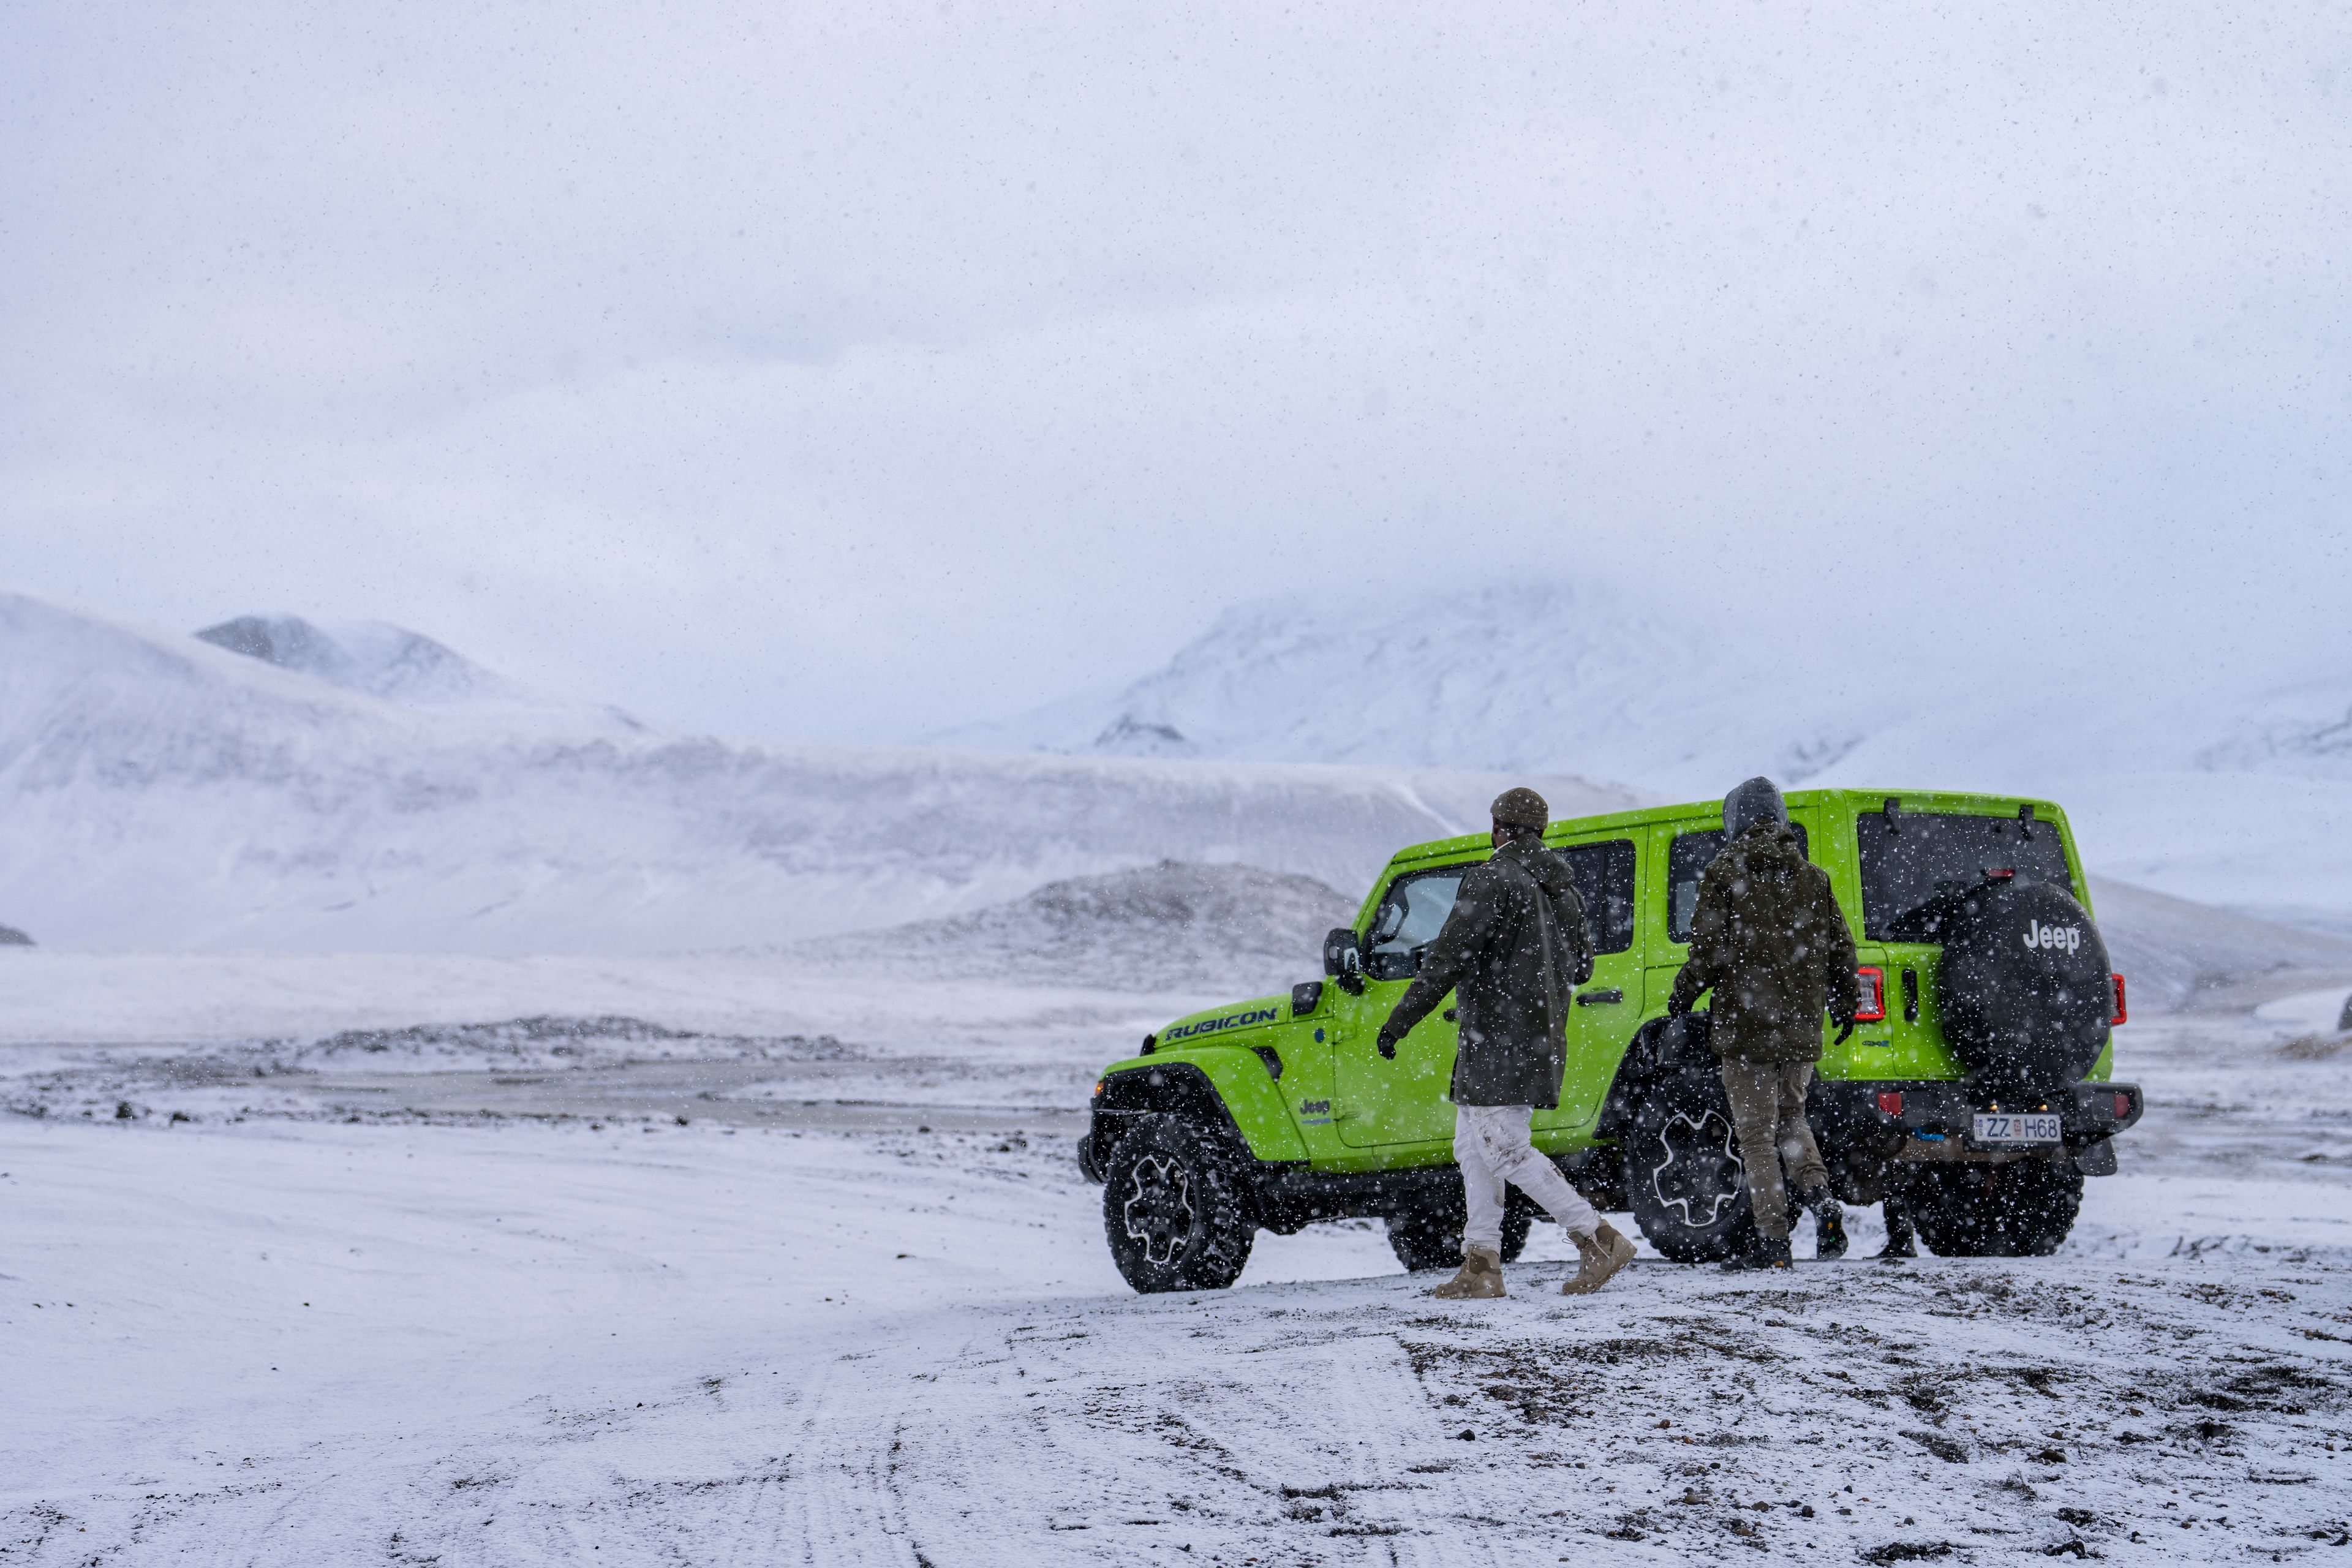 4x4 rental car in iceland with snow on the ground in January